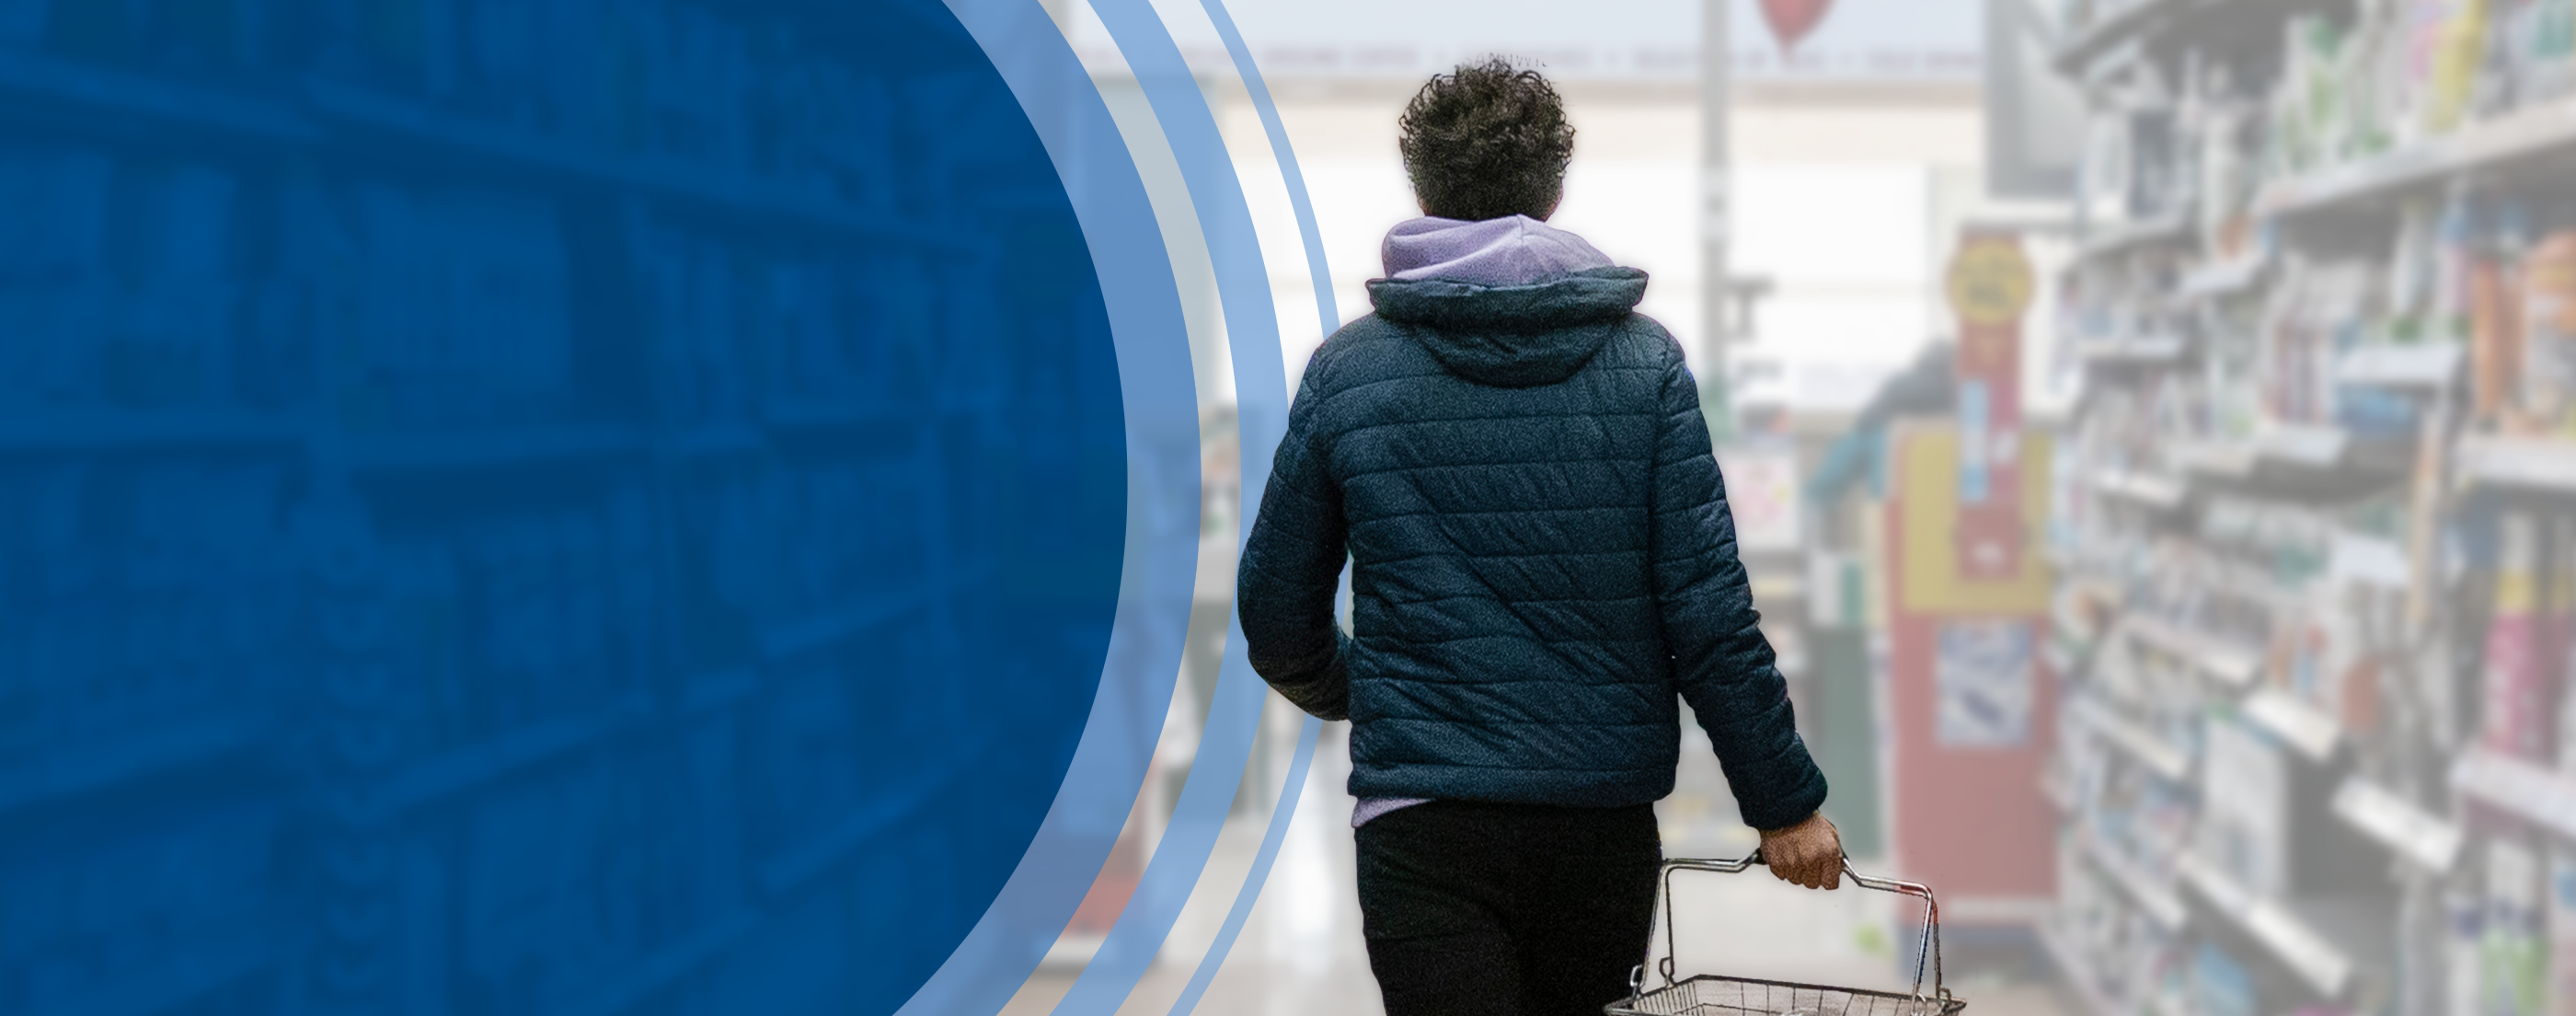 A person in a dark blue, puffy hooded jacket walks away from the camera and down a supermarket aisle with household items stacked on the shelves on both sides. The person carries a shopping basket containing only the few items they could afford as they walk toward the checkout lanes.